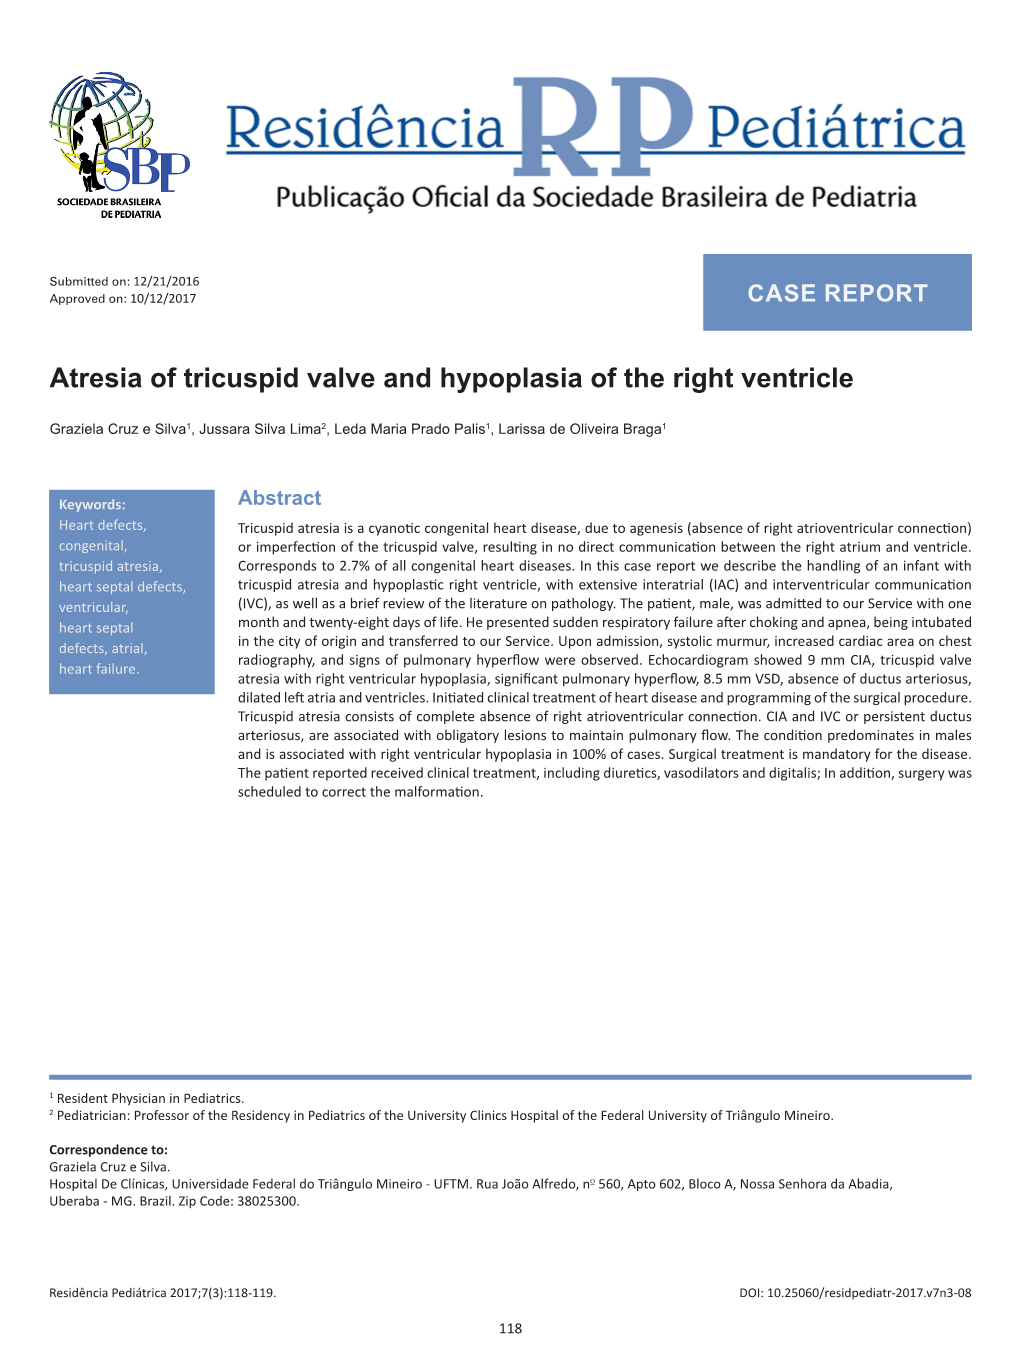 Atresia of Tricuspid Valve and Hypoplasia of the Right Ventricle